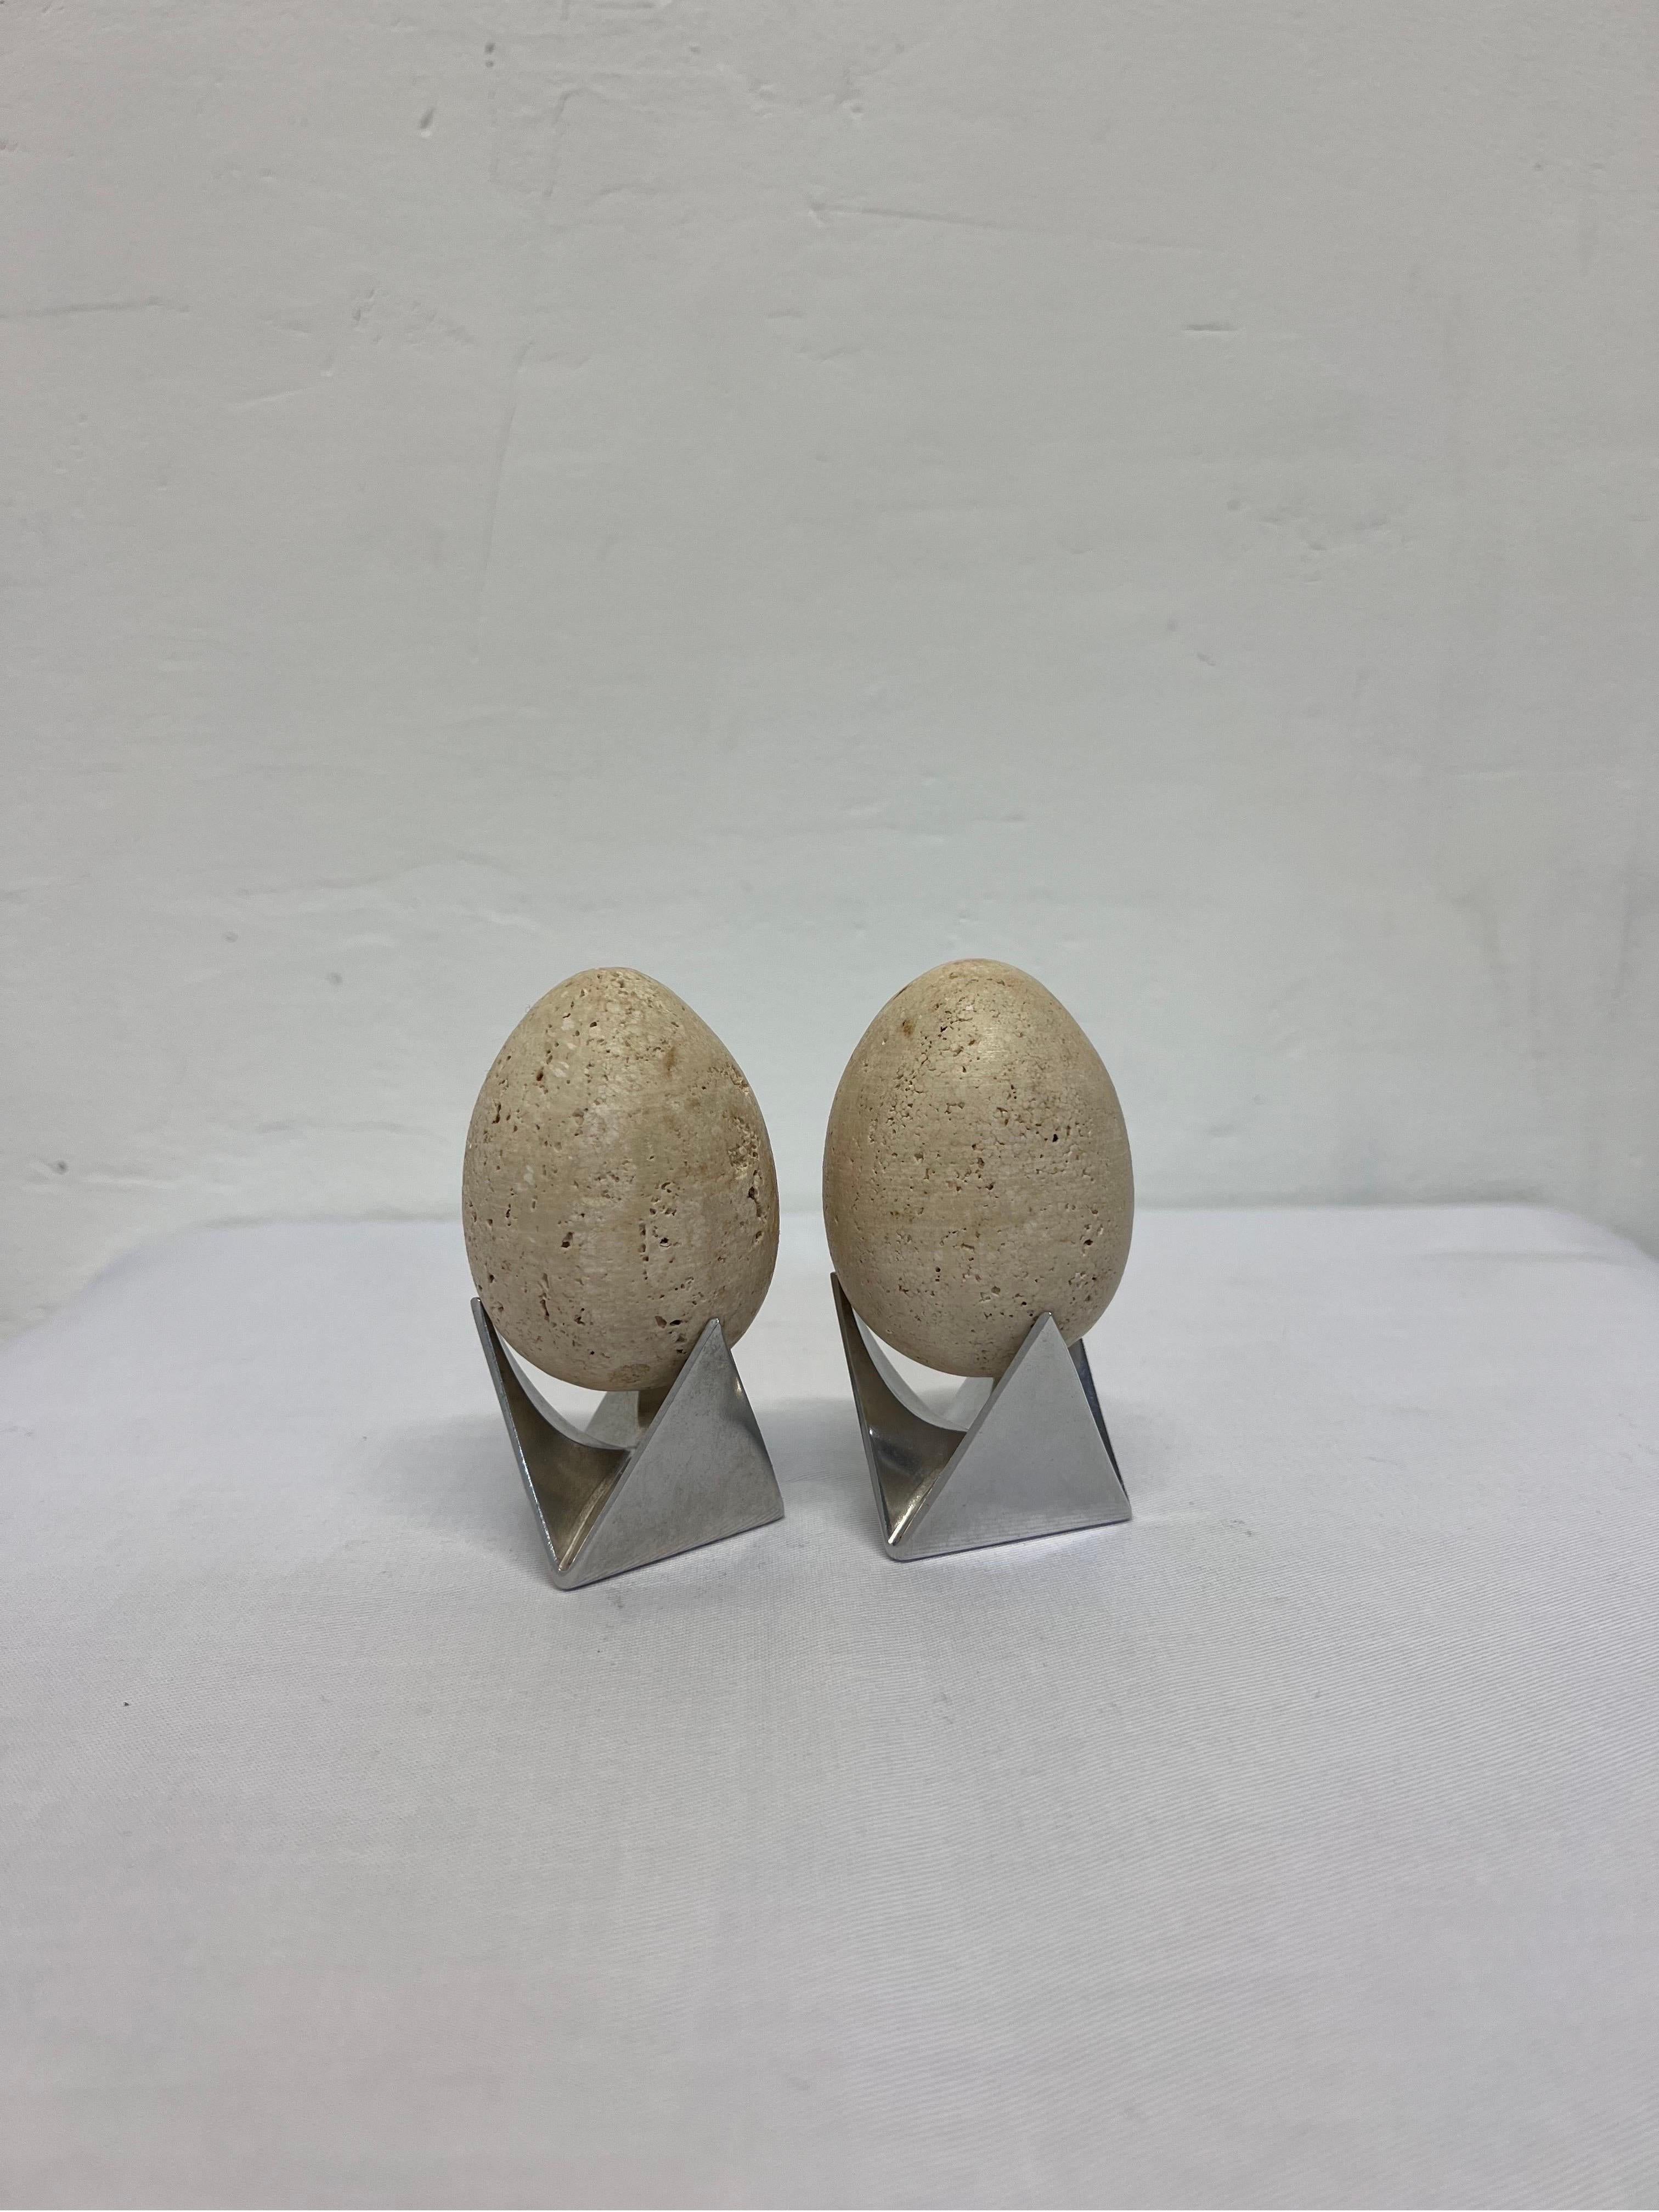 Mid-Century Modern Mid-Century Travertine Egg Sculptures Atop Alessi Roost Egg Cups, a Pair For Sale